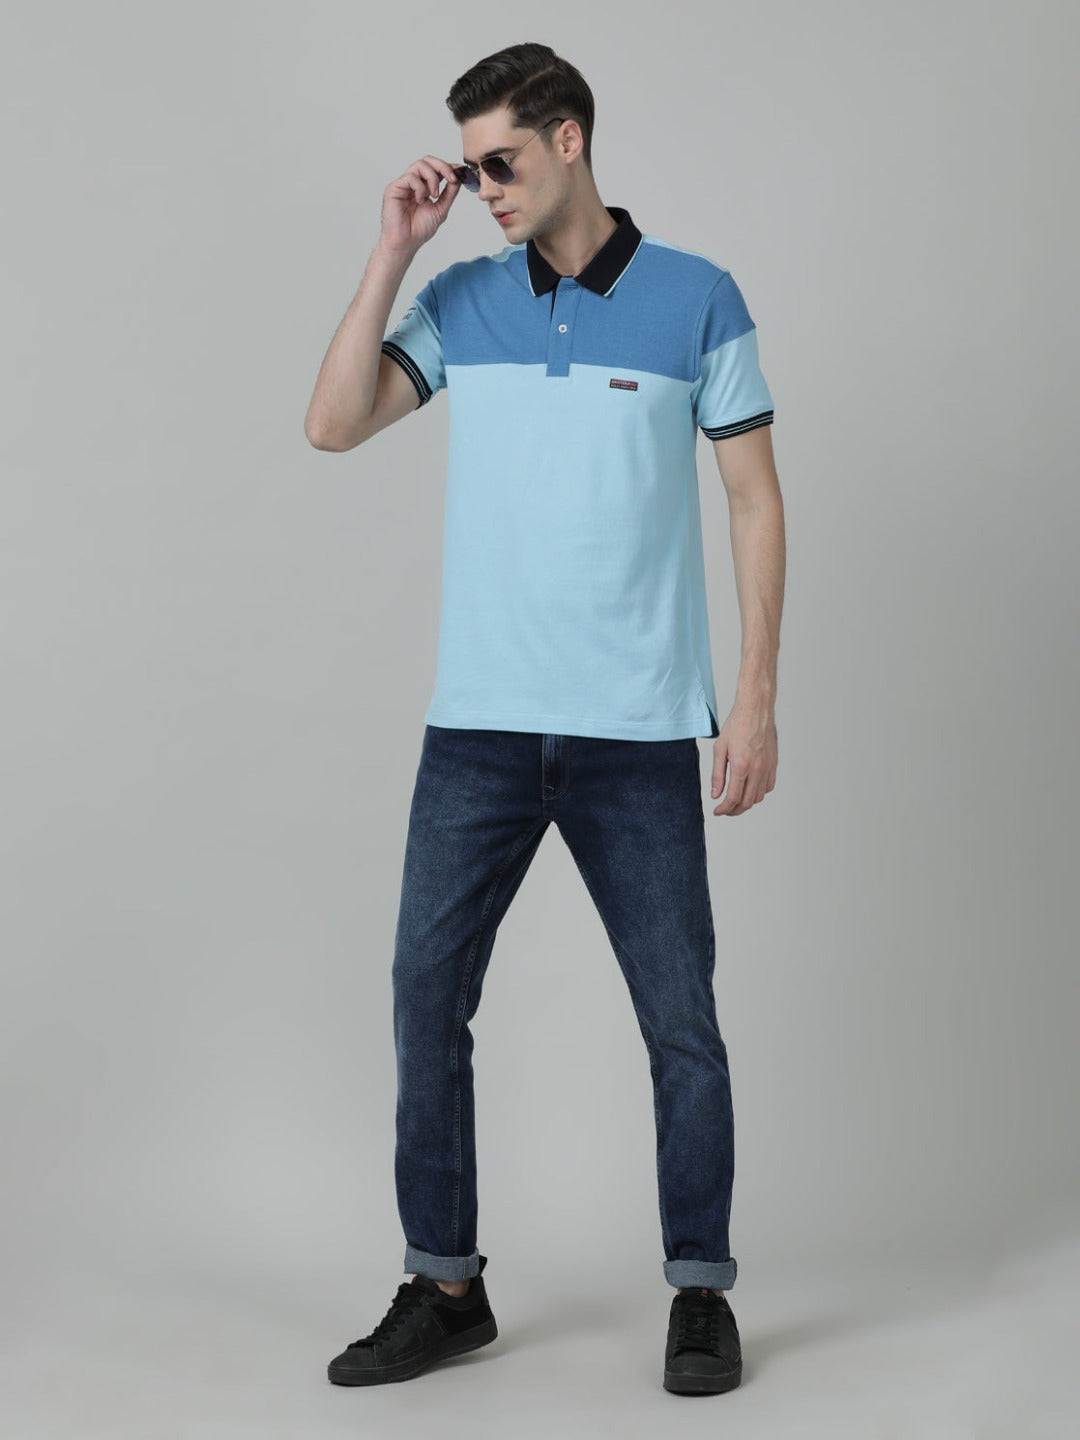 Top more than 210 polo t shirt with jeans latest